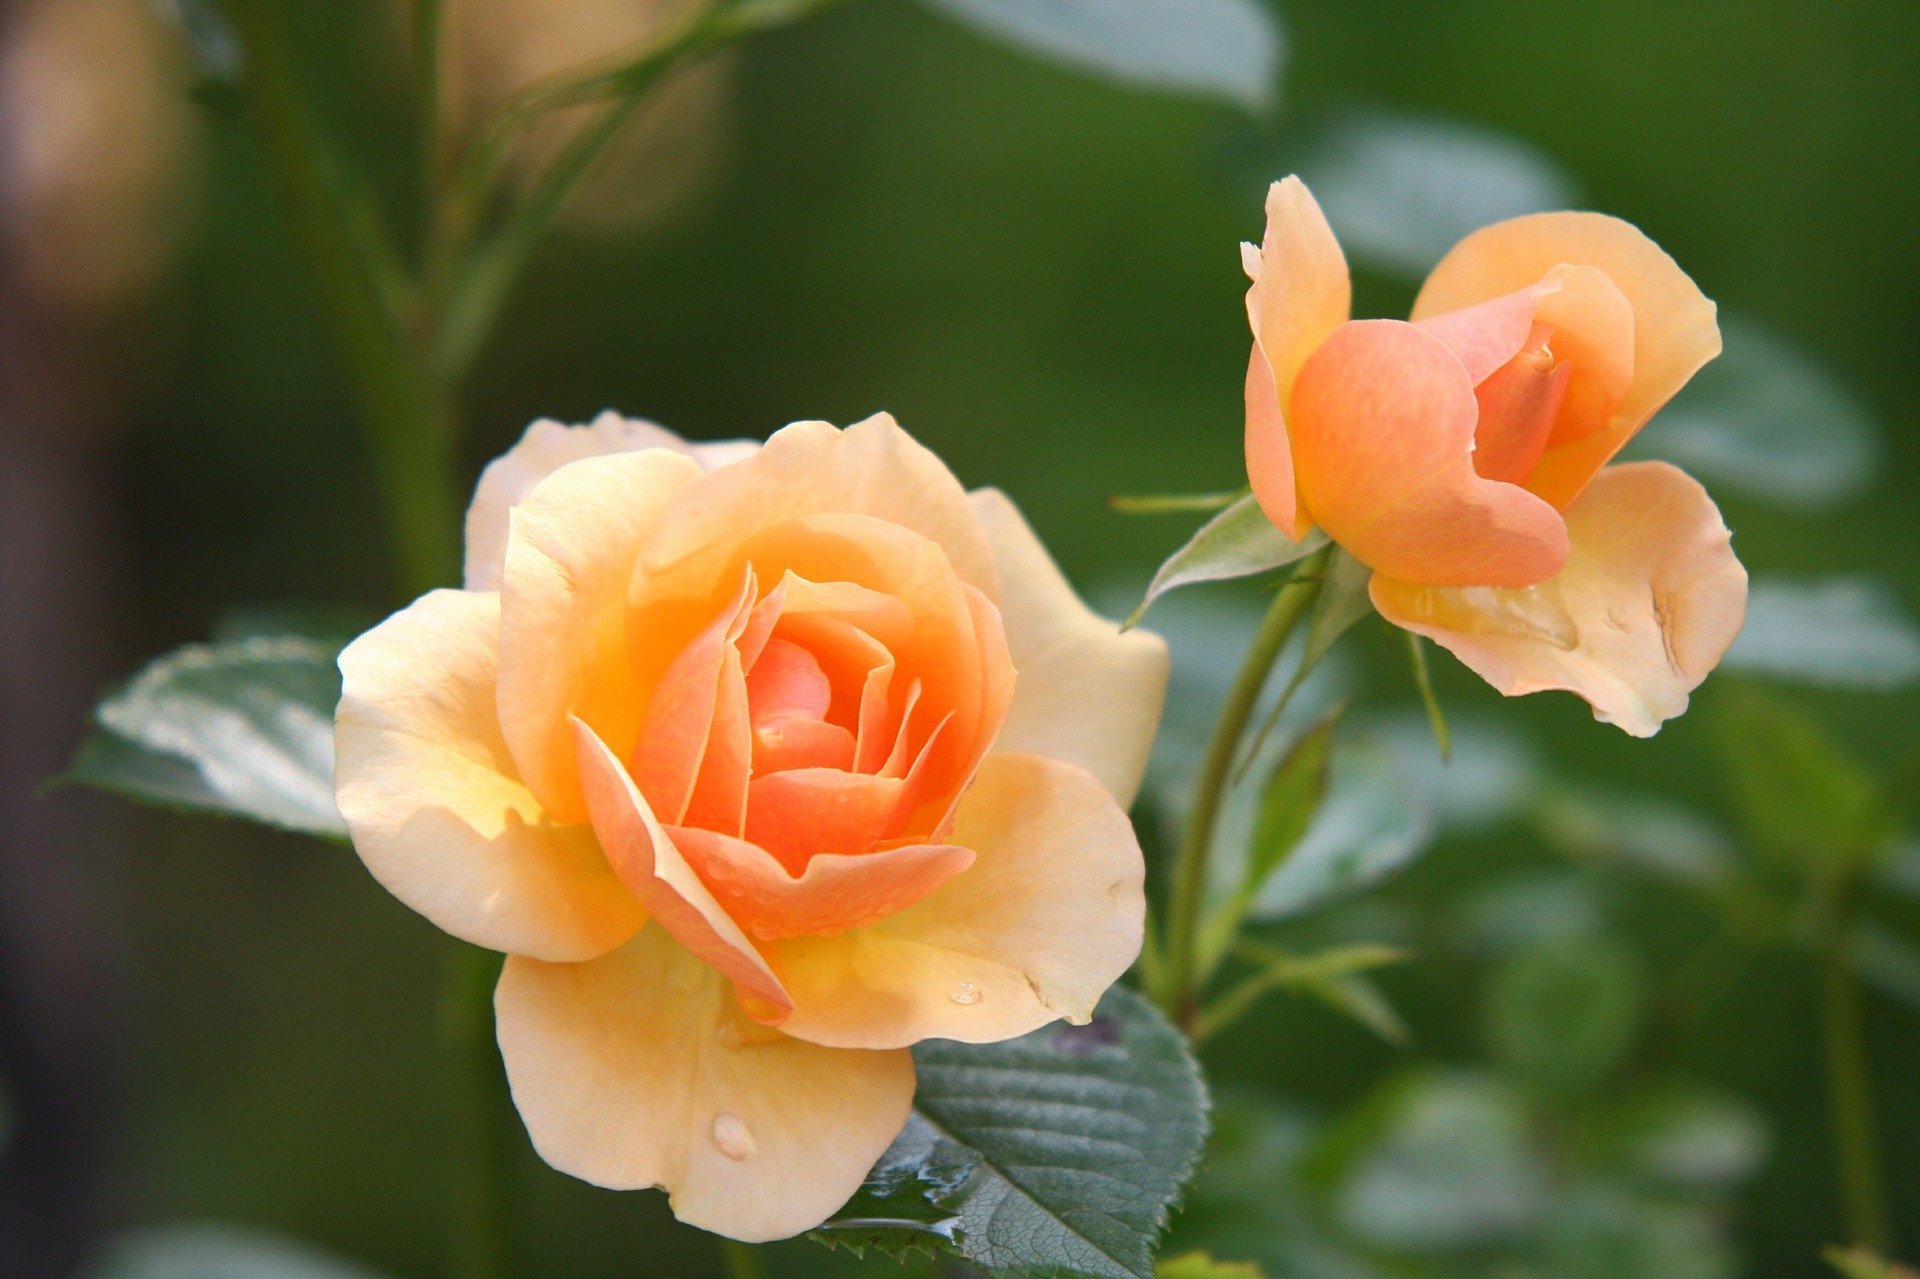 An image of two orange-colored rose flowers. | Photo: Pixabay